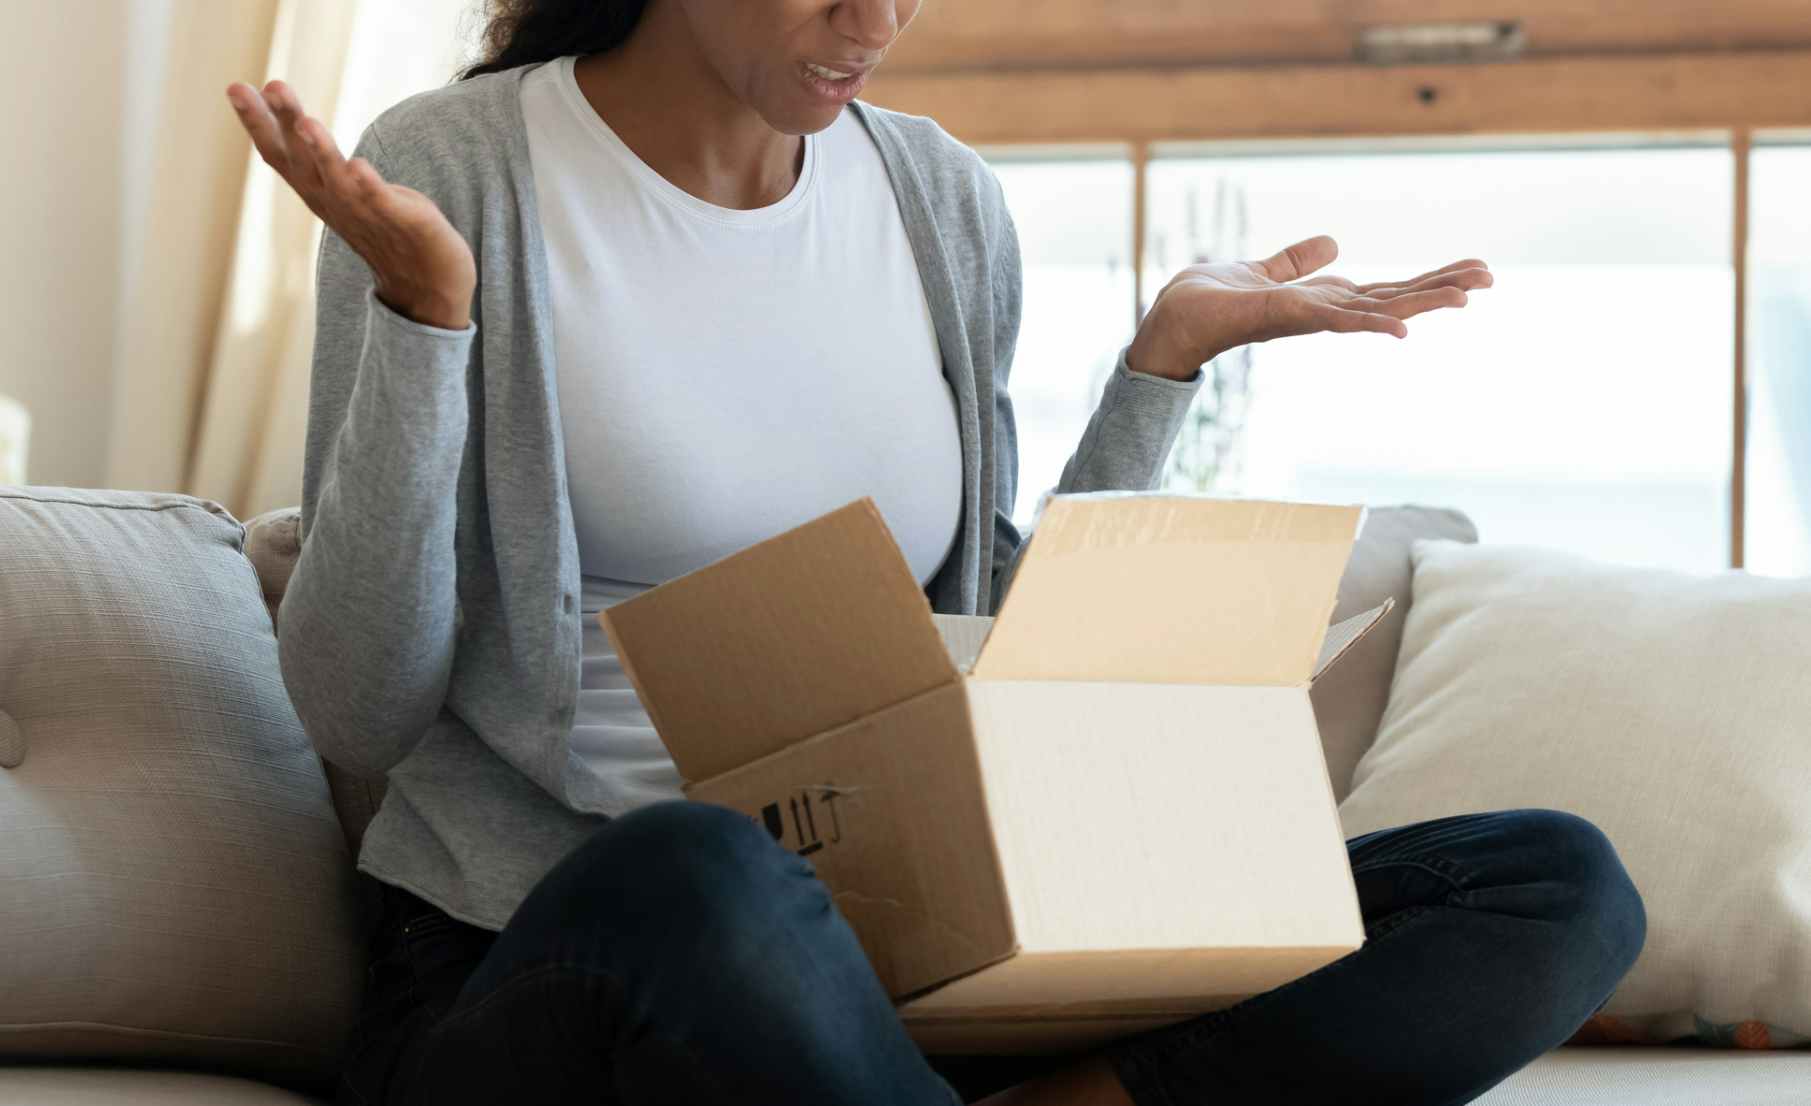 Woman looking upset about her online purchase (but even more upset since she'll have to pay for returns)